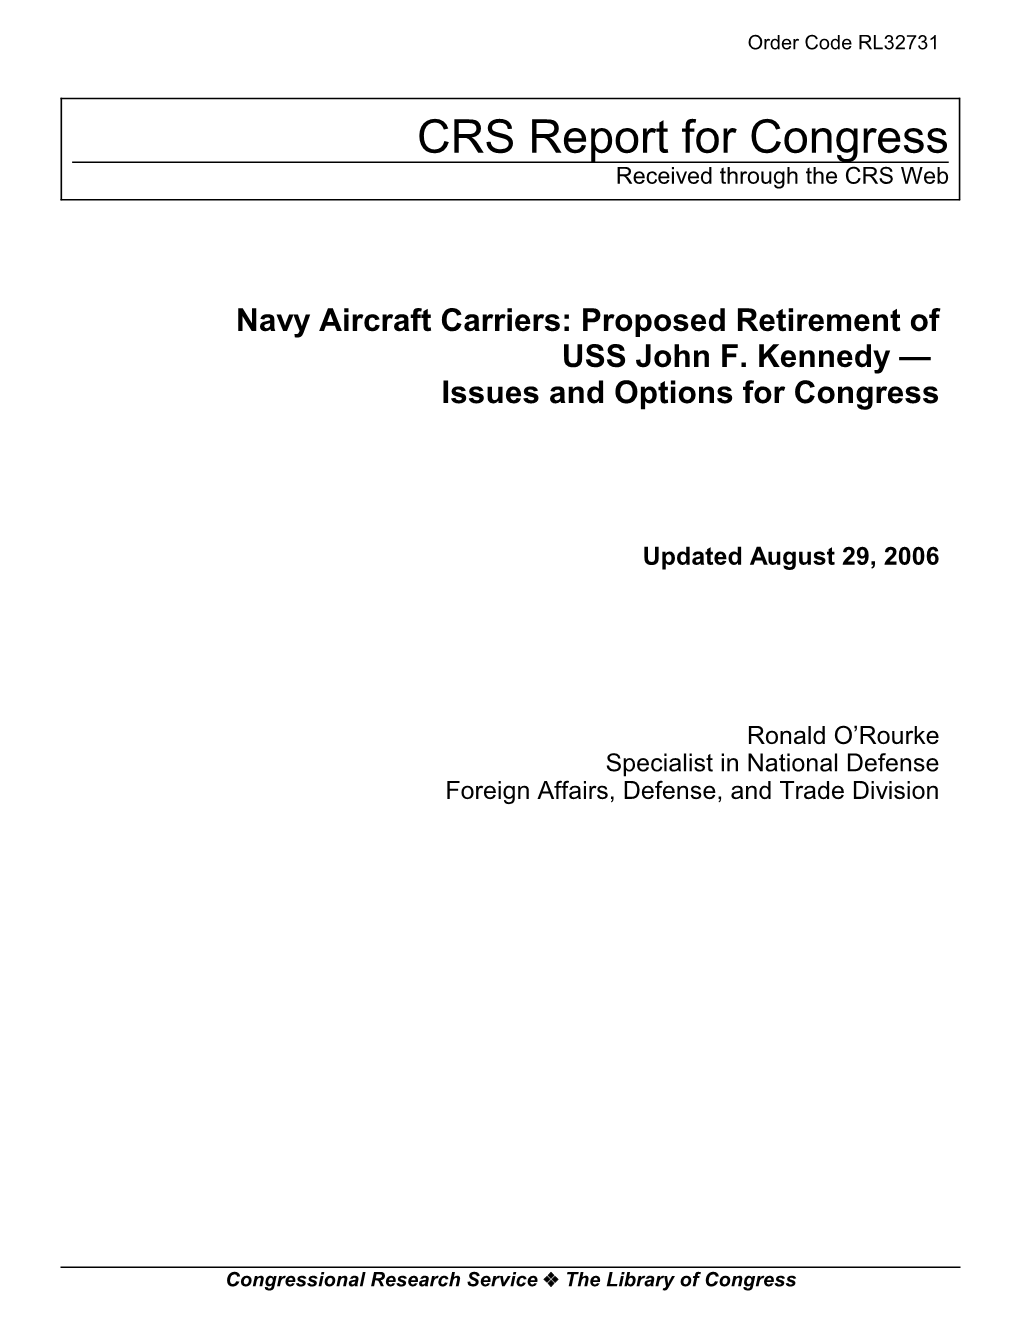 Navy Aircraft Carriers: Proposed Retirement of USS John F